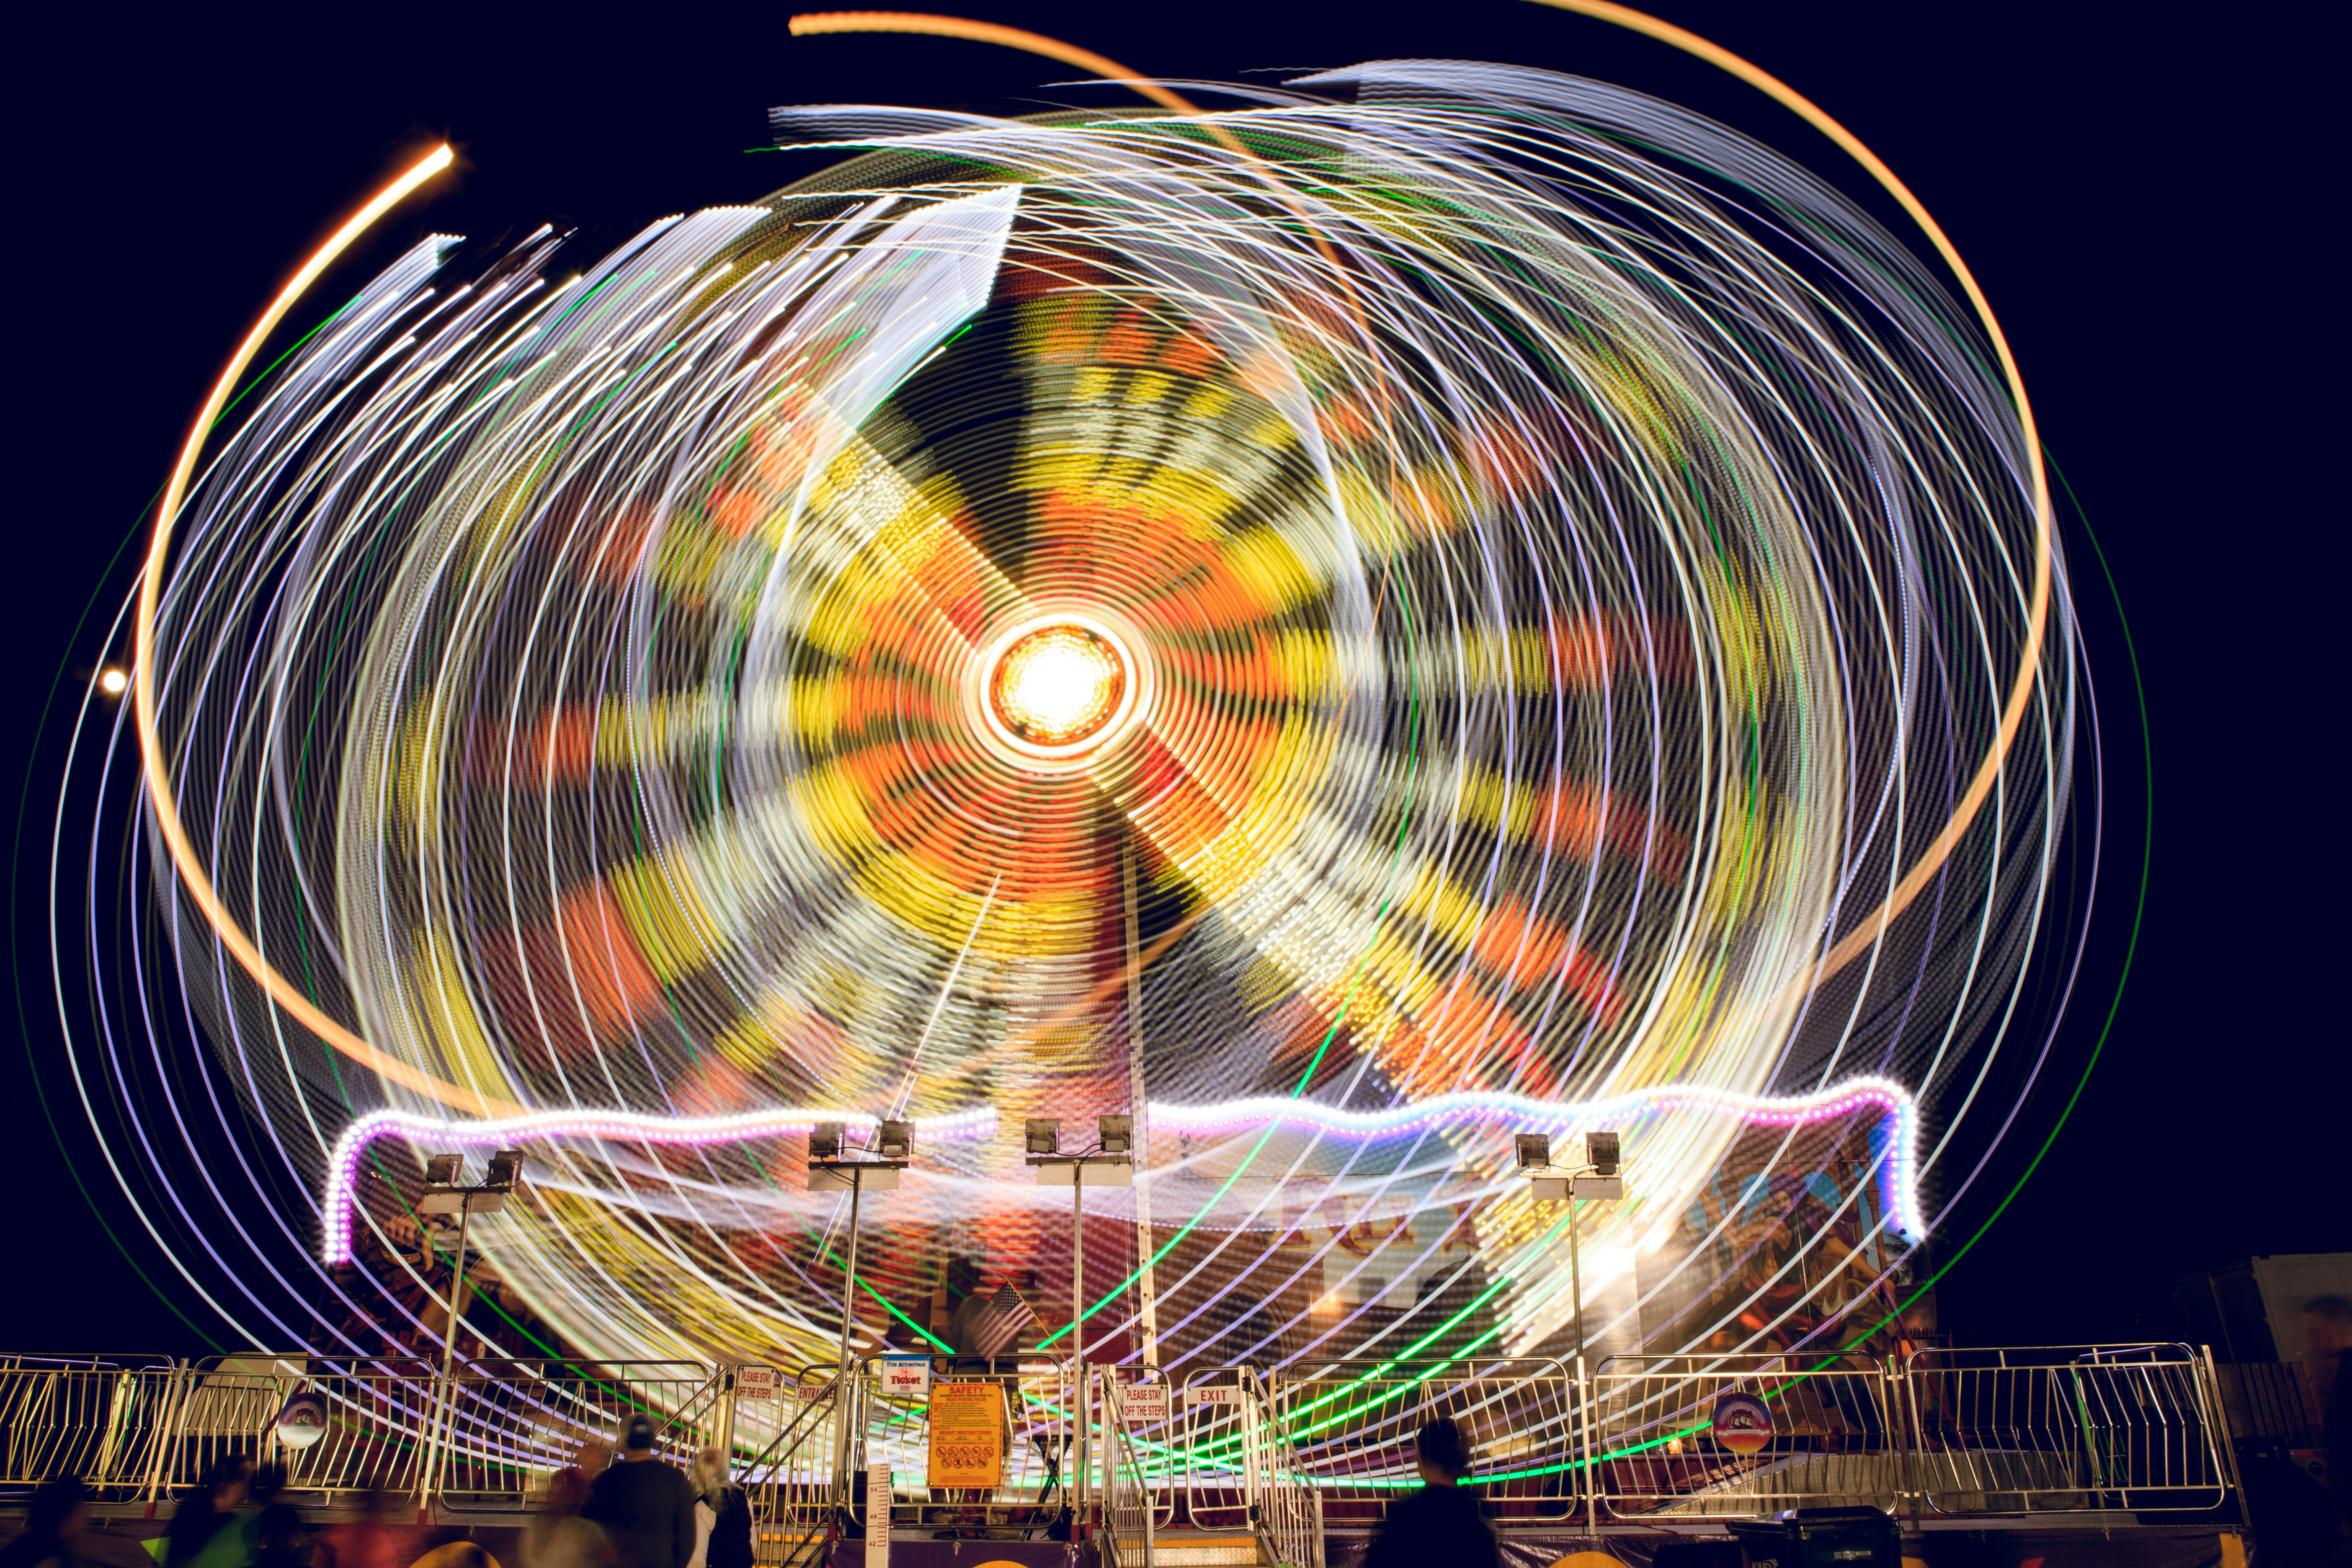 time lapse photography of ferris wheel during night time